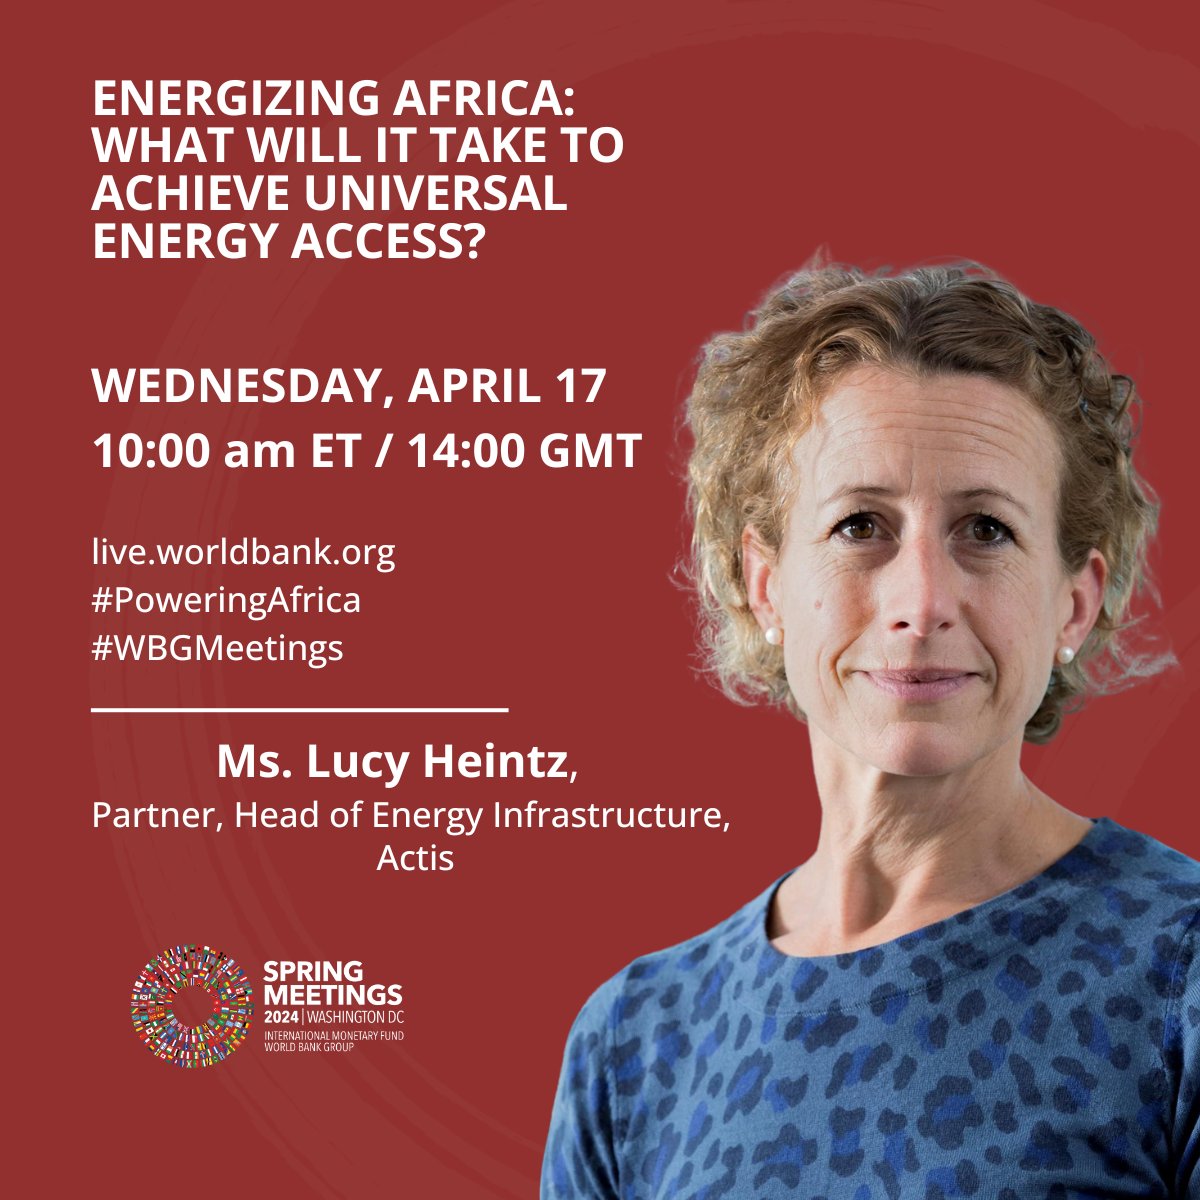 #WBGmeetings EVENT | What will it take to achieve universal #EnergyAccess in Africa? Join the conversation with a panel of experts from the public and private sectors to find out! April 17, 10am ET | 2pm GMT wrld.bg/SWBa50Rfq7O #PoweringAfrica